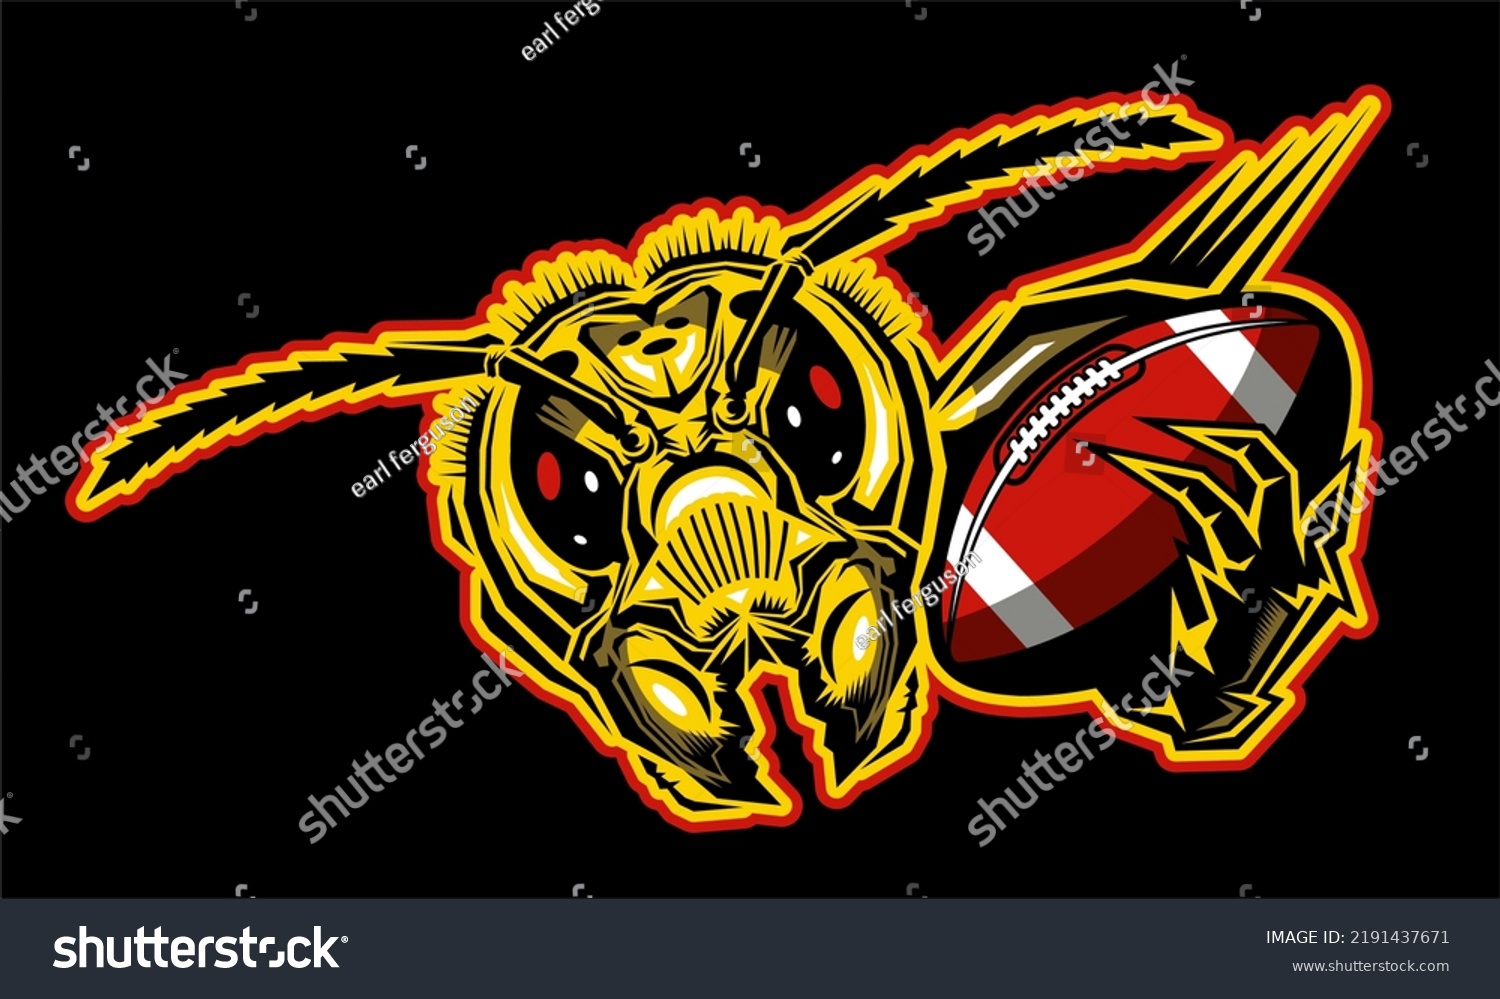 SVG of mean hornet mascot holding football for school, college or league svg